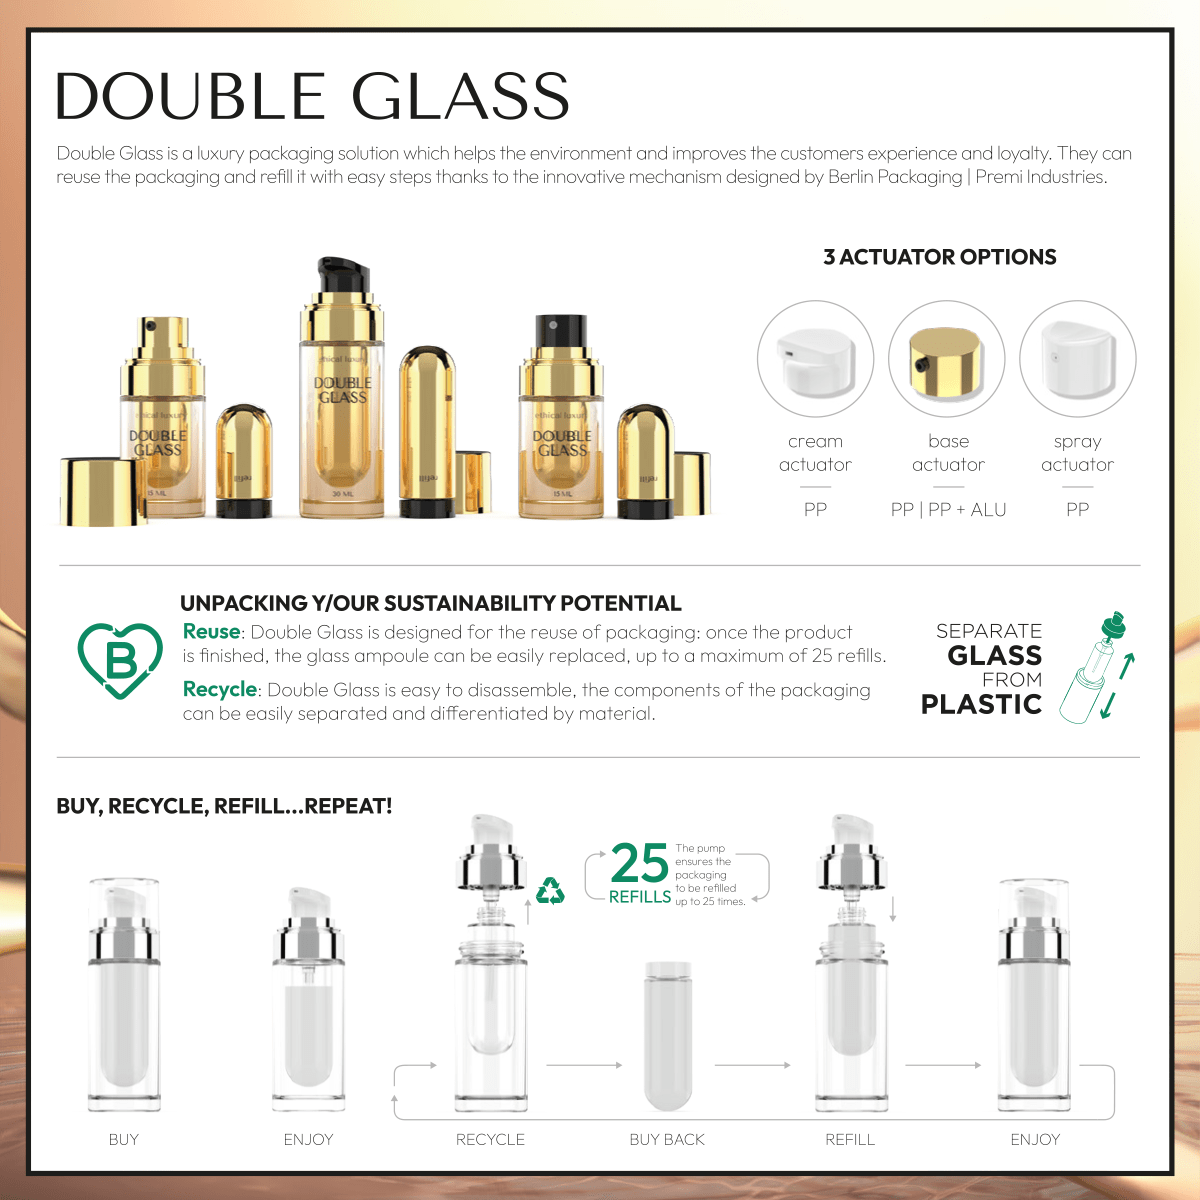 02-DOUBLE GLASS